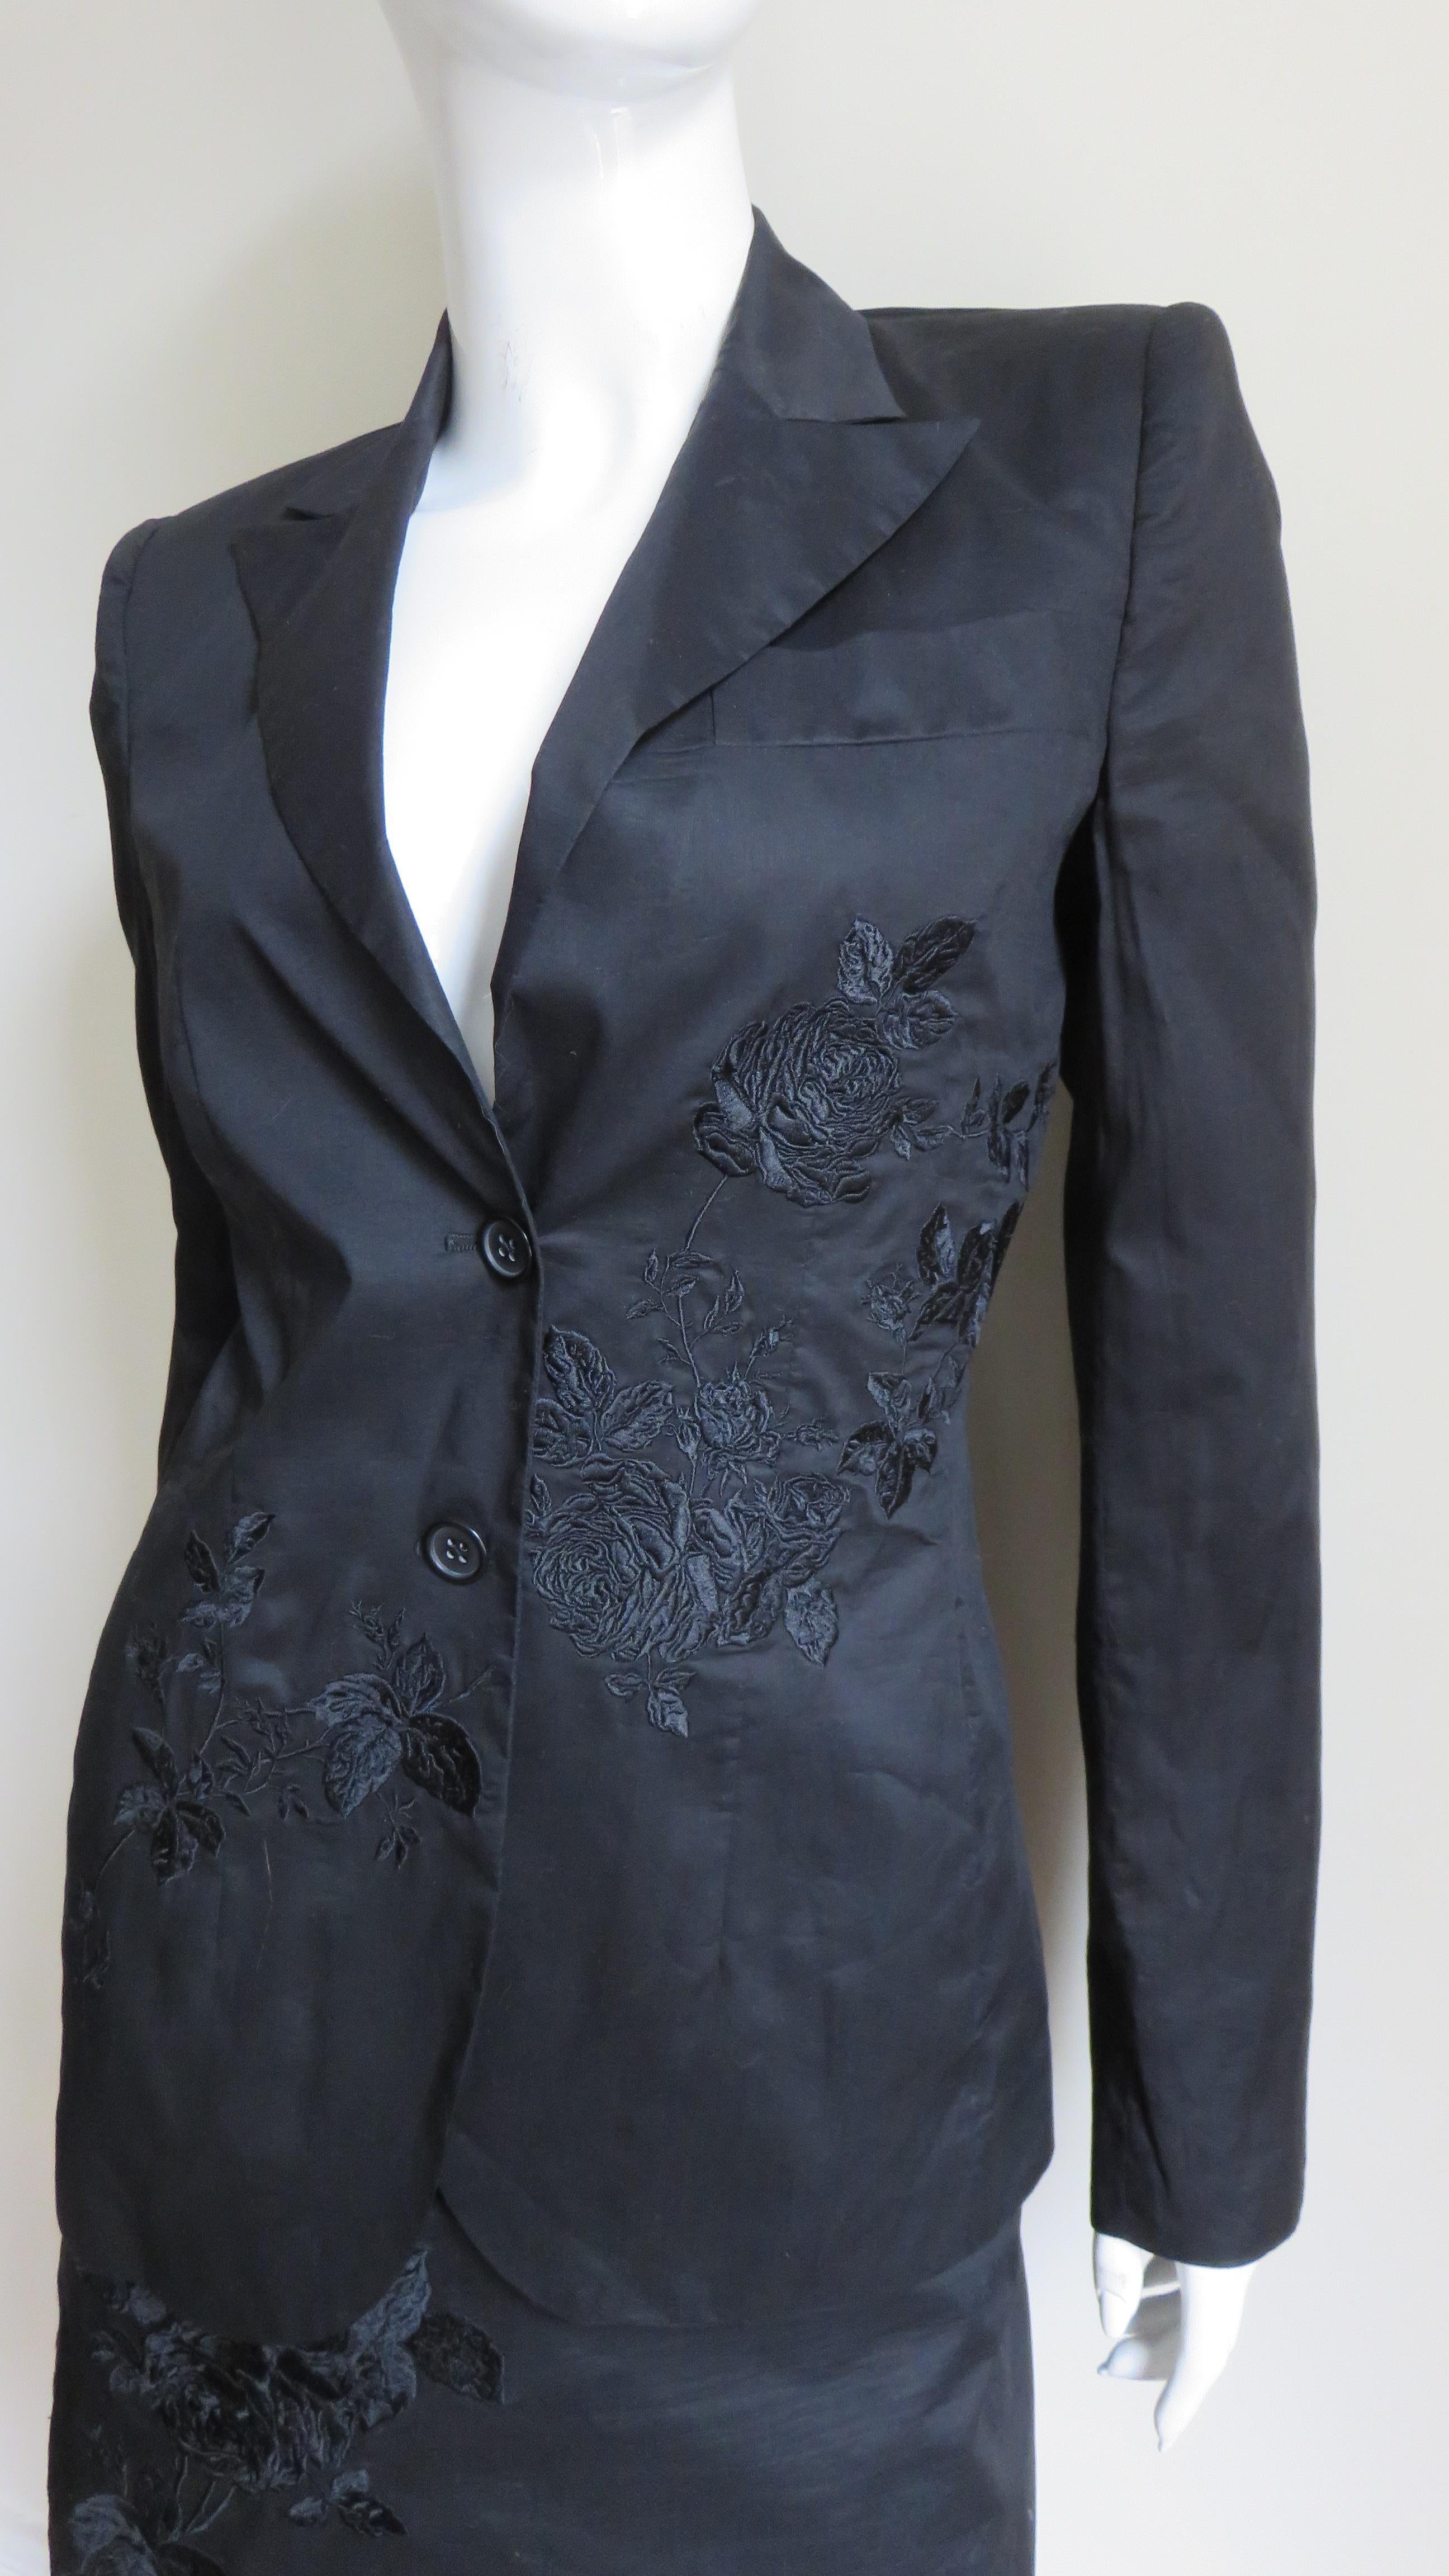 Women's 2002 Alexander McQueen Embroidered 3 Pc Black Skirt Suit and White Skirt